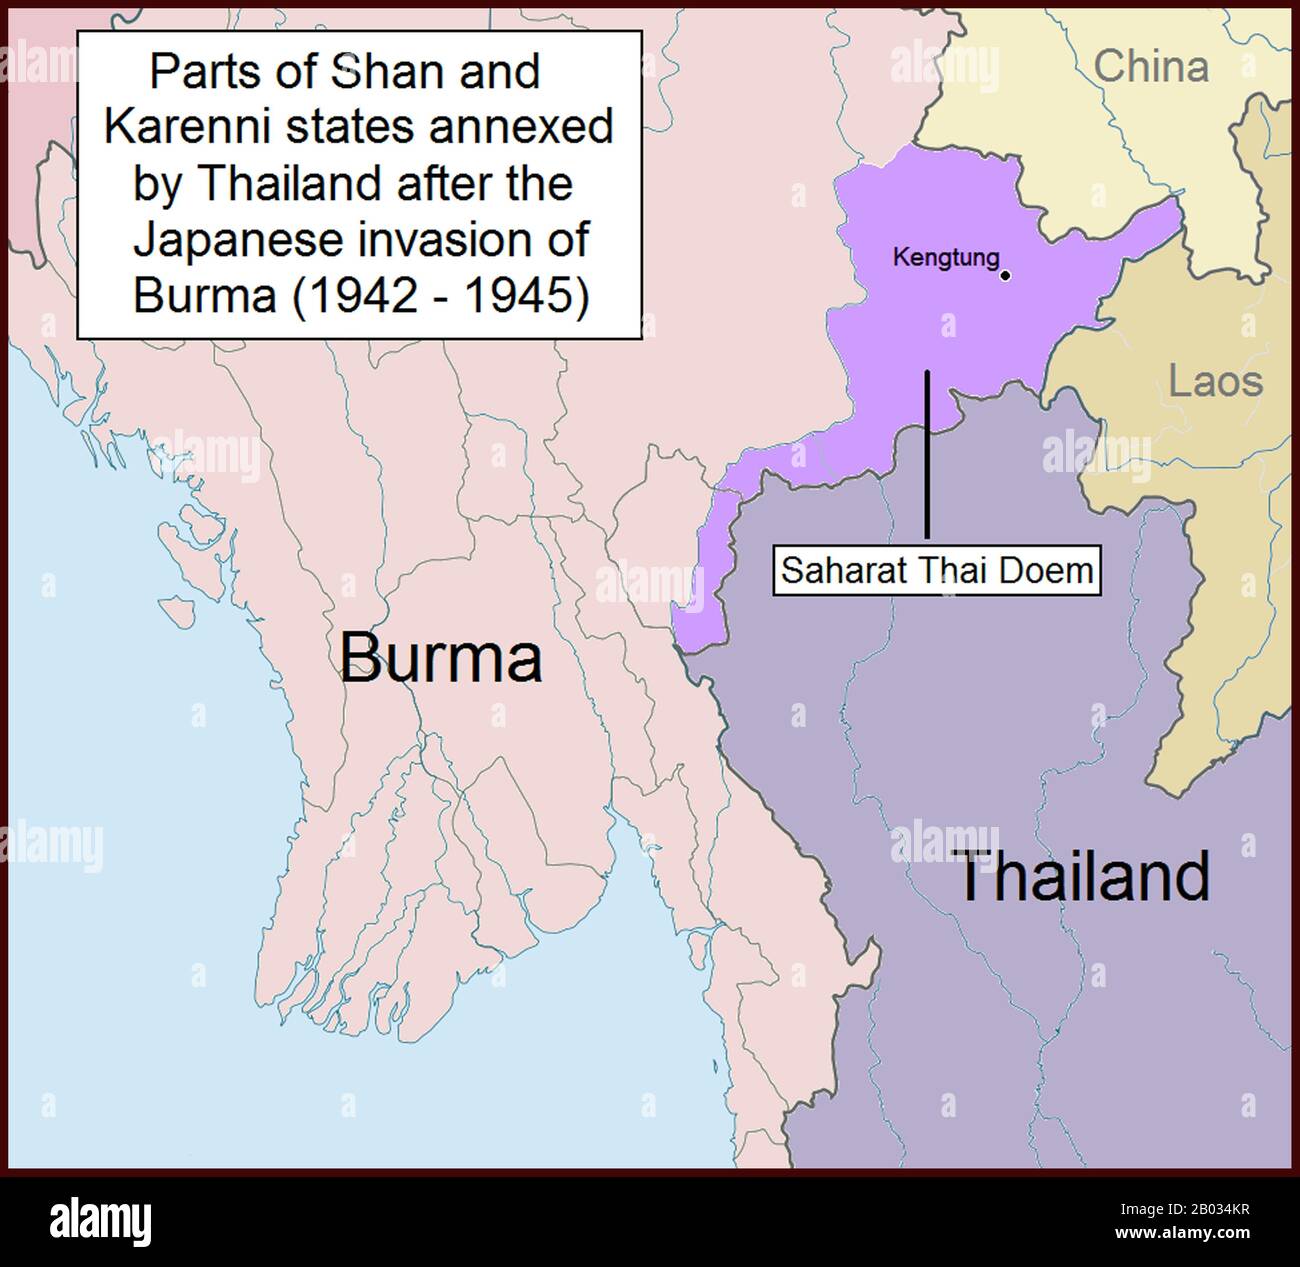 'Saharat Thai Doem' or 'The Federated Original Thai (States)' was a territory in Burma's eastern Shan State and eastern Karenni state approximating to territories ceded under pressure by Siam to the British in 1893 and considered 'lost territories' by subsequent Siamese and Thai governments.  In 1942 the Imperial Japanese Army accompanied by the Thai Phayap Army invaded Burma's Federated Shan States from Thailand. Following the Japanese-Thai victory, on 18 August 1943 the Japanese government agreed to the Thai annexation of all of Kengtung State and part of Mongpan State. The Thai authorities Stock Photo